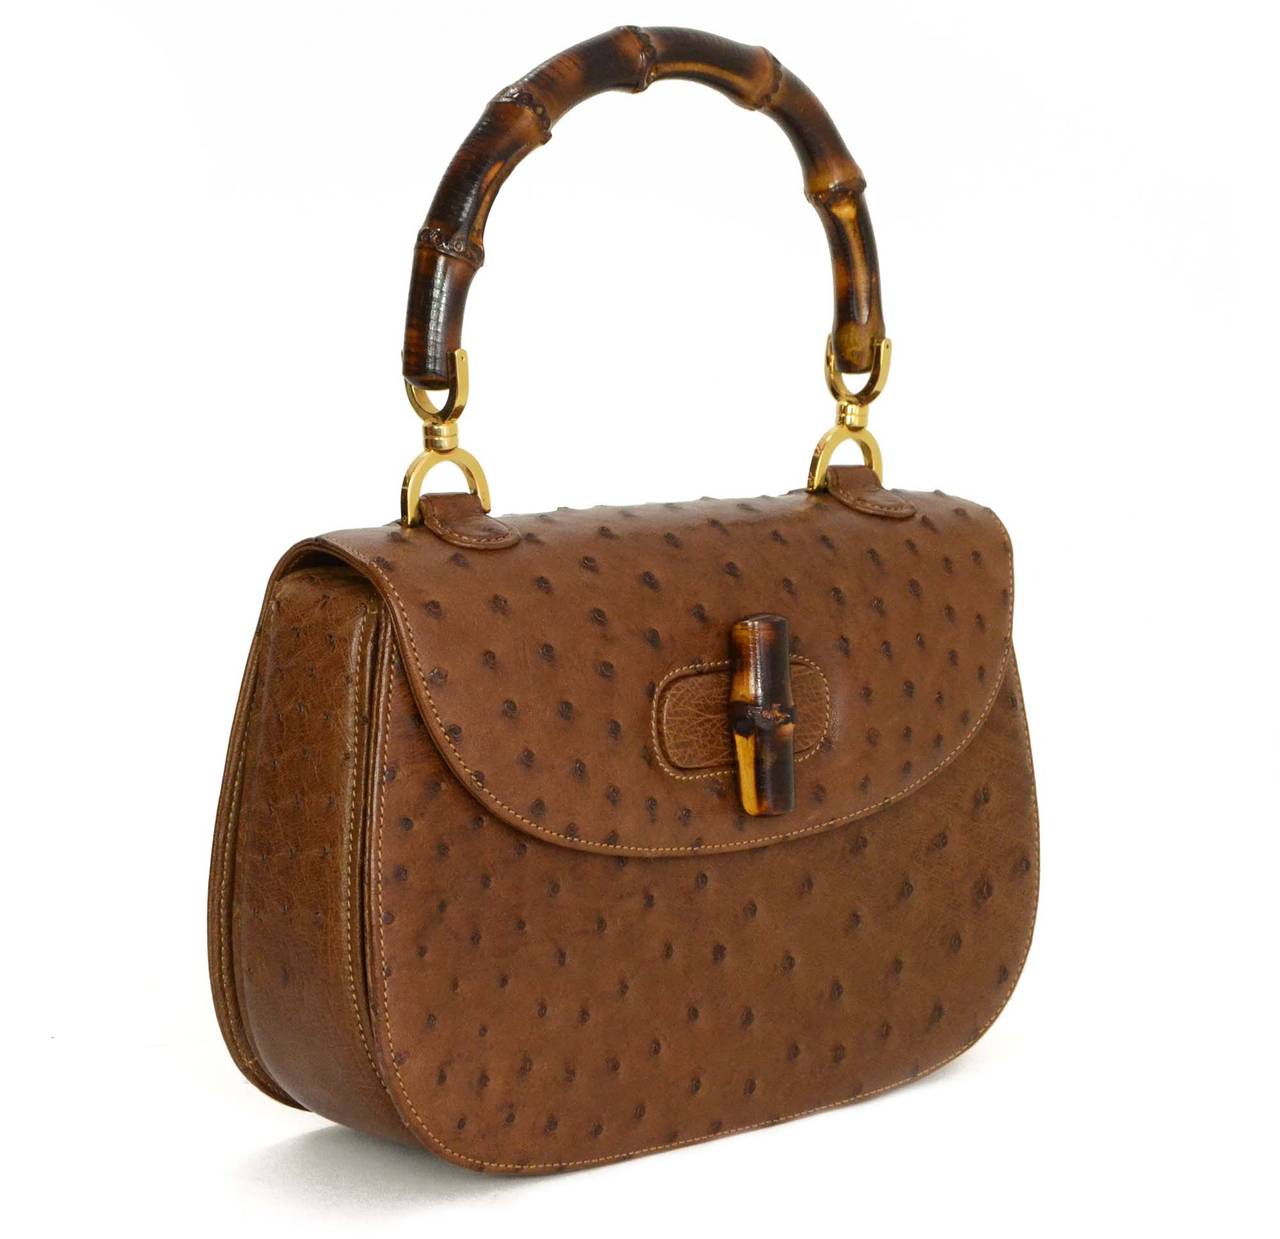 Gucci Vintage '70s-'80s Brown Ostrich Vintage Evening Bag
Features bamboo handles and twist lock
    Made in: Italy
    Color: Brown and goldtone
    Hardware: Goldtone
    Materials: Leather, suede, wood, and metal
    Lining: Brown suede
  